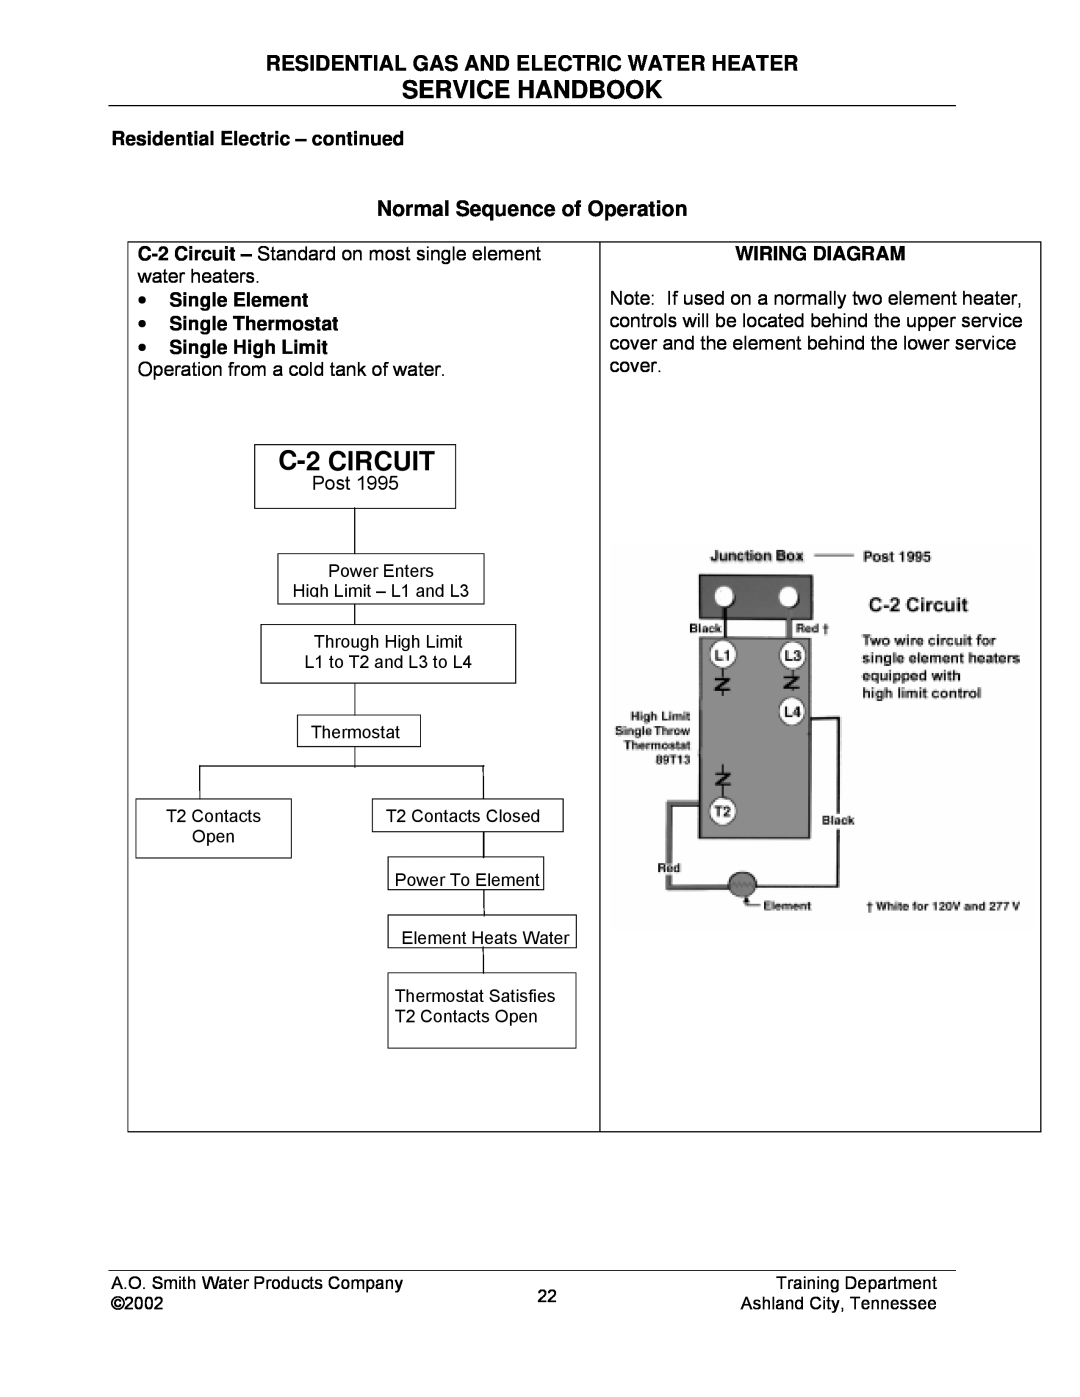 A.O. Smith TC-049-R2 manual C-2 CIRCUIT, Service Handbook, Residential Gas And Electric Water Heater 